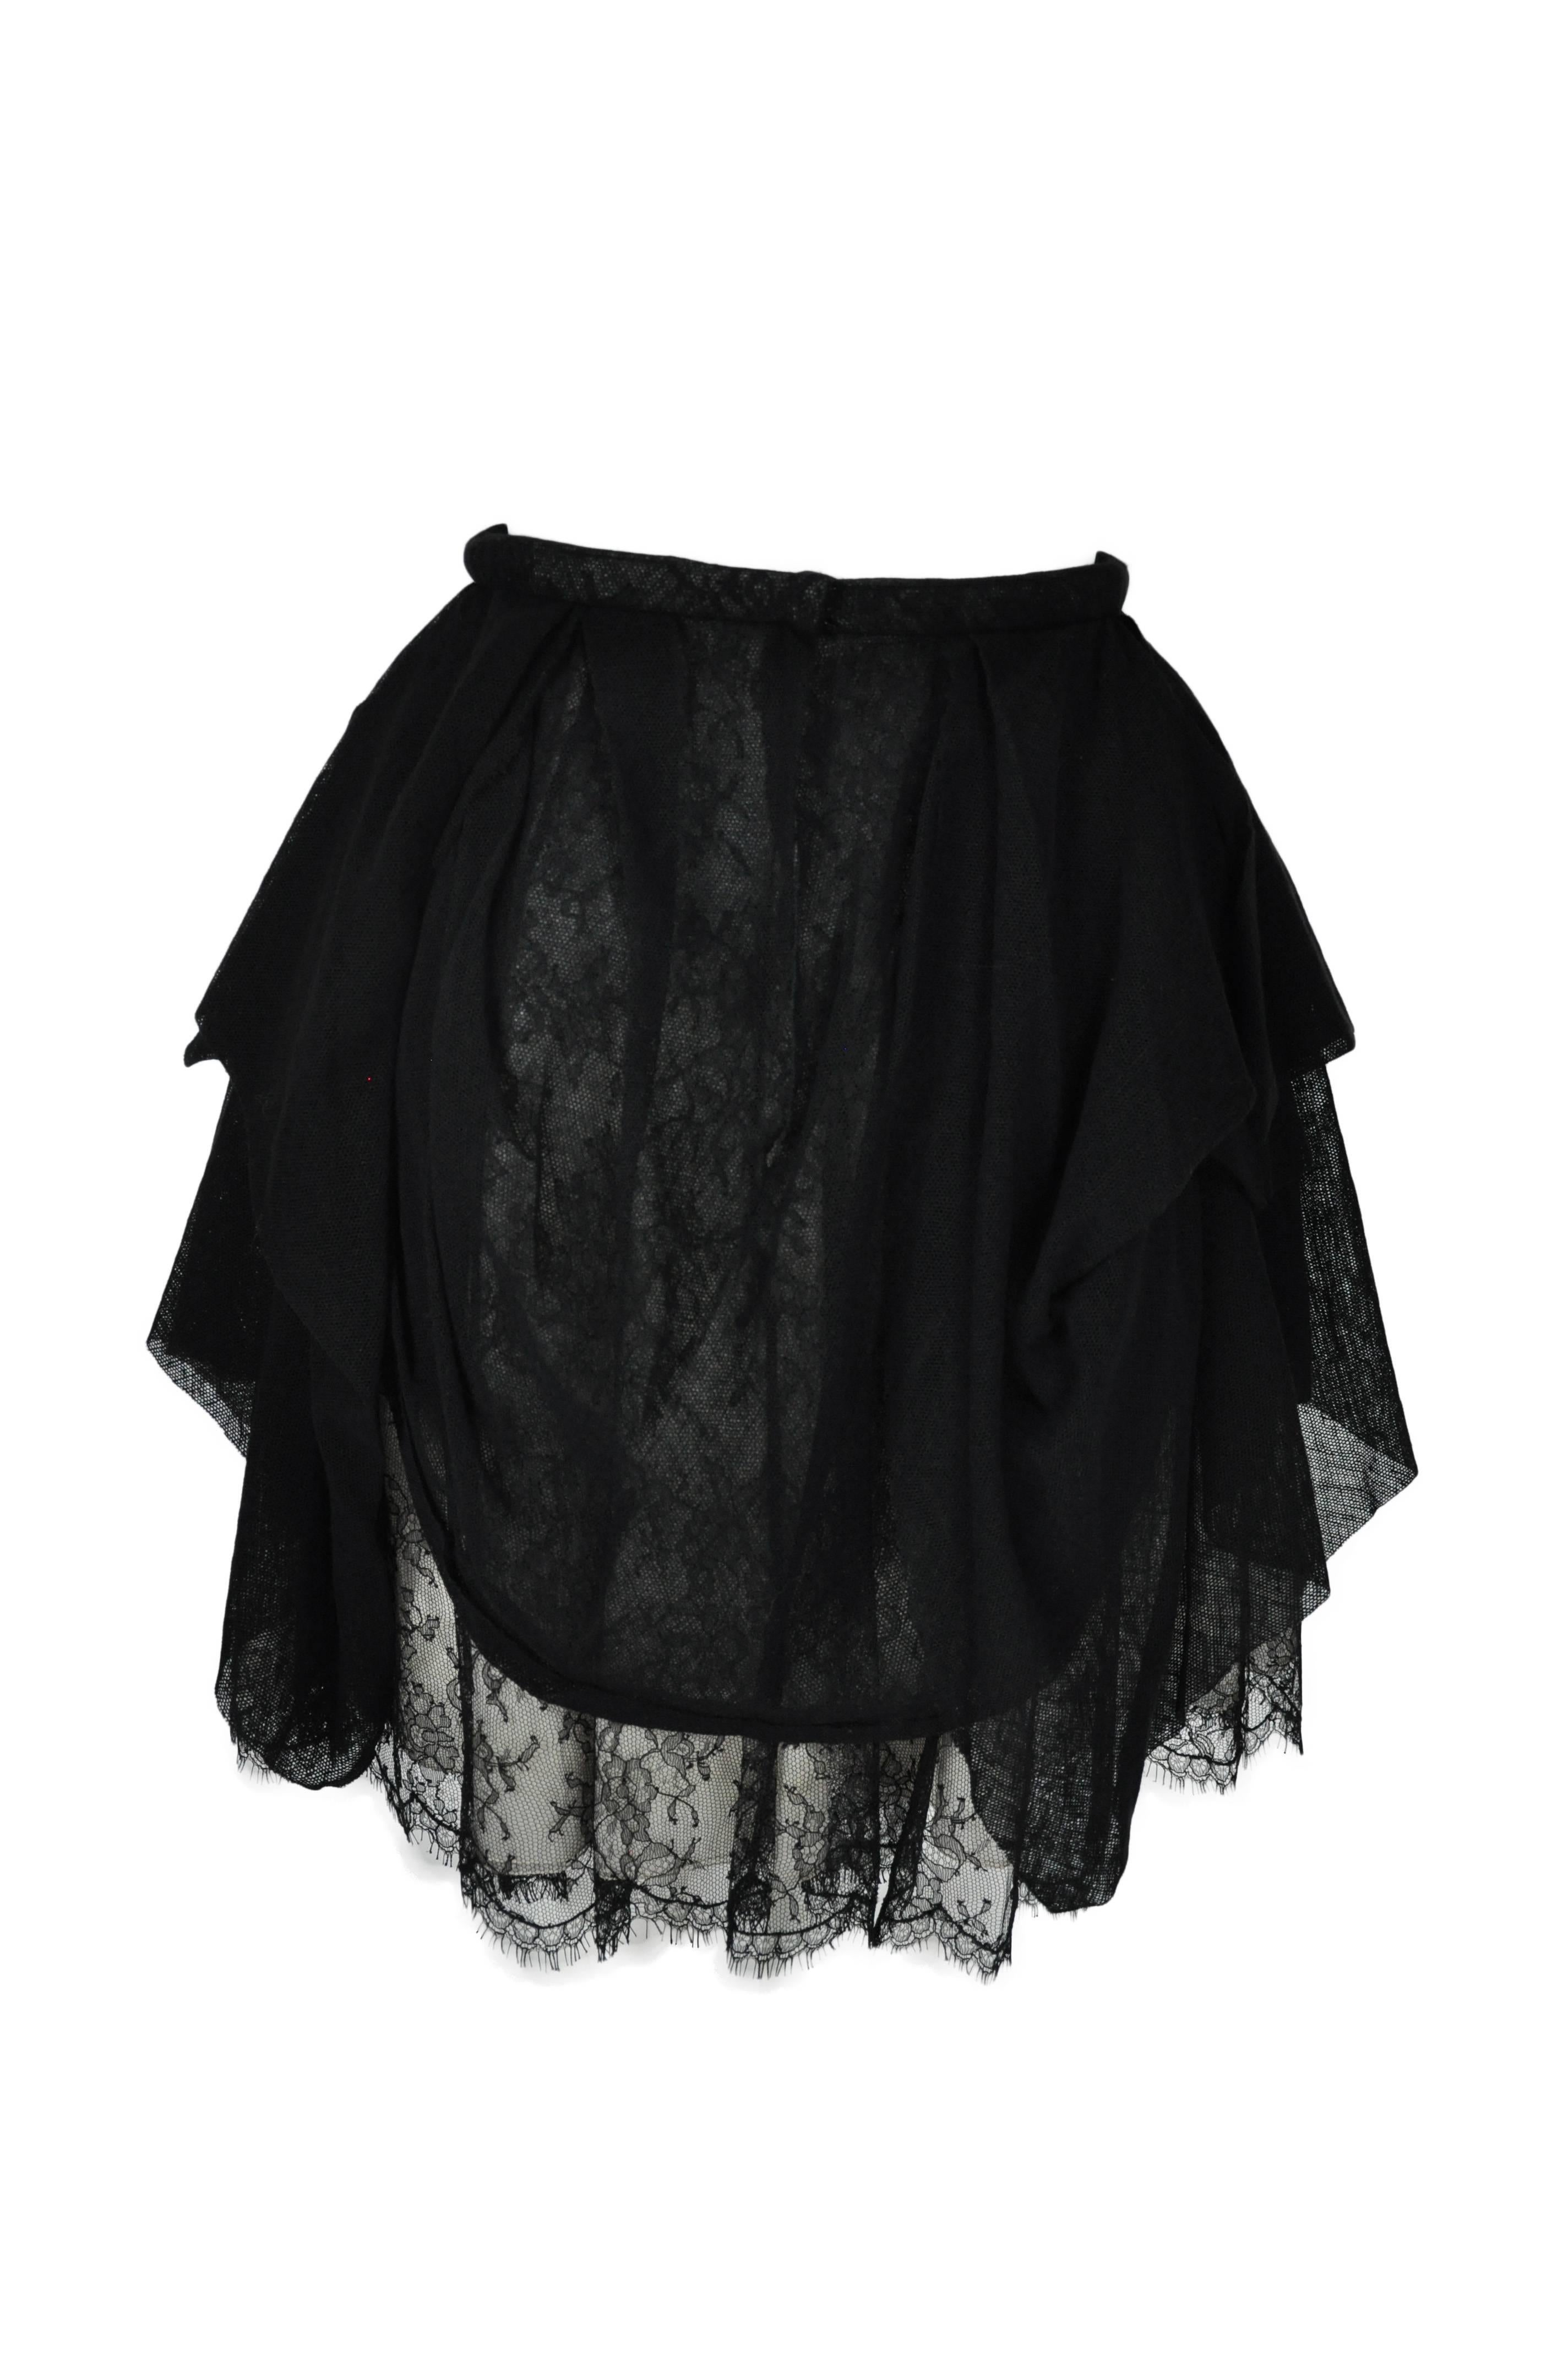 A black asymmetric tulle overlay lace skirt from Chanel 2010 collection.  Fully lined.